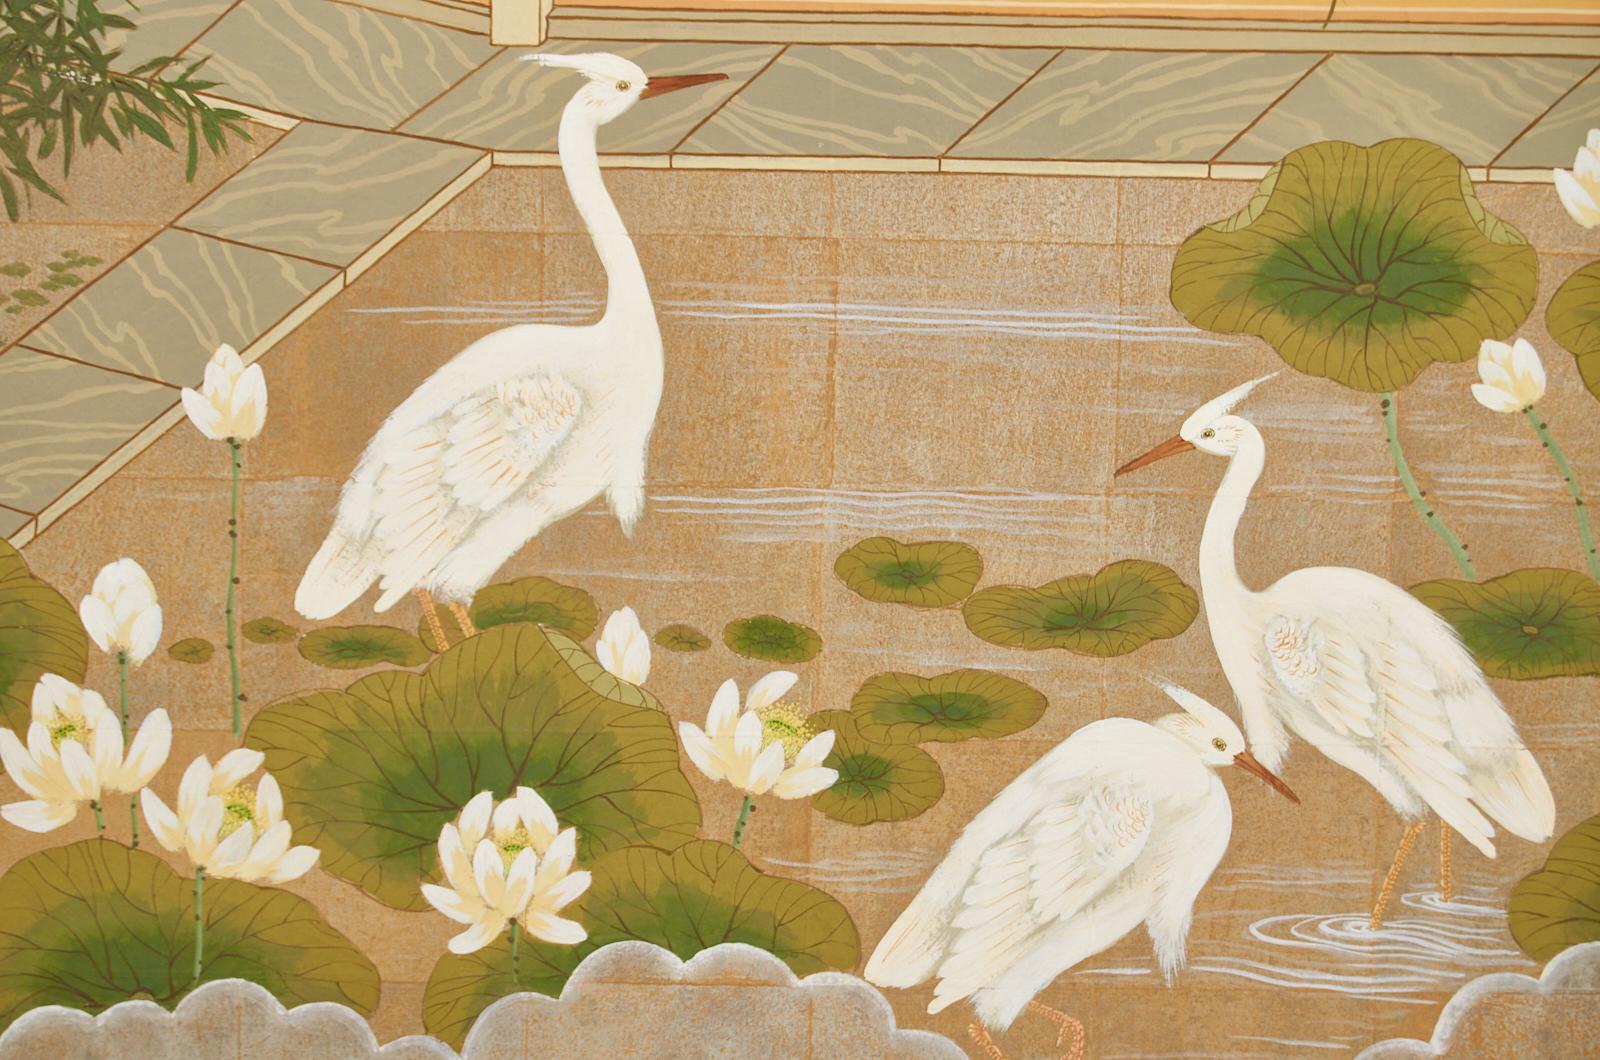 Set of Three Robert Crowder Chinoiserie Landscape Panels In Good Condition For Sale In Rio Vista, CA